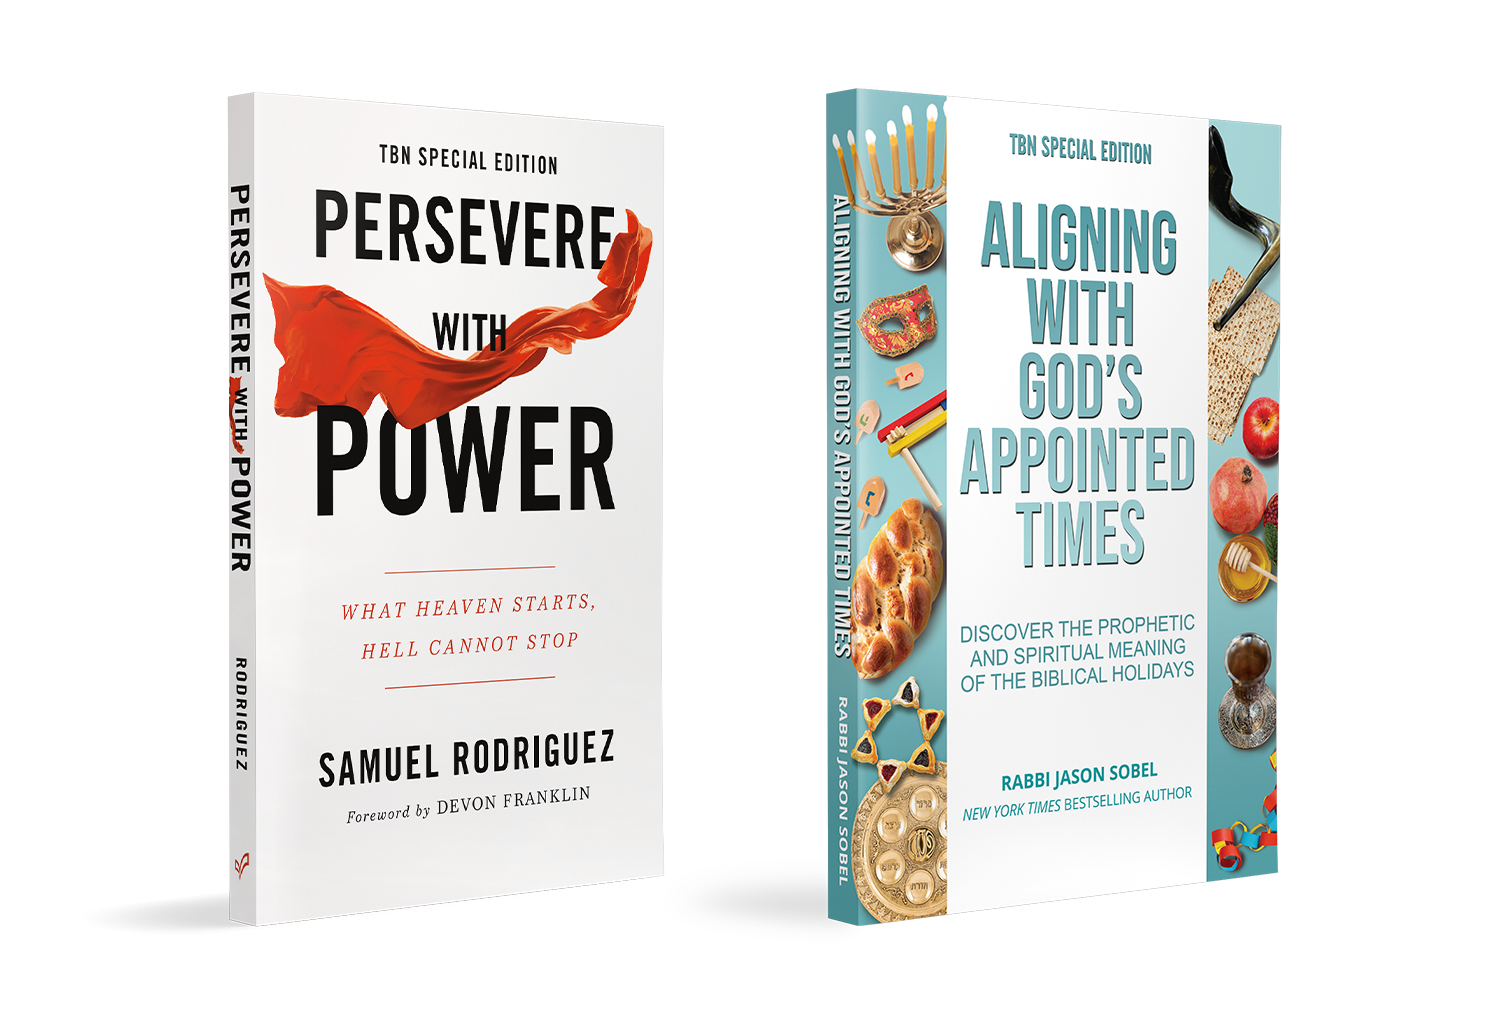 Persevere With Power, by Samuel Rodriguez and Aligning With God’s Appointed Times, by Messianic Rabbi Jason Sobel on TBN